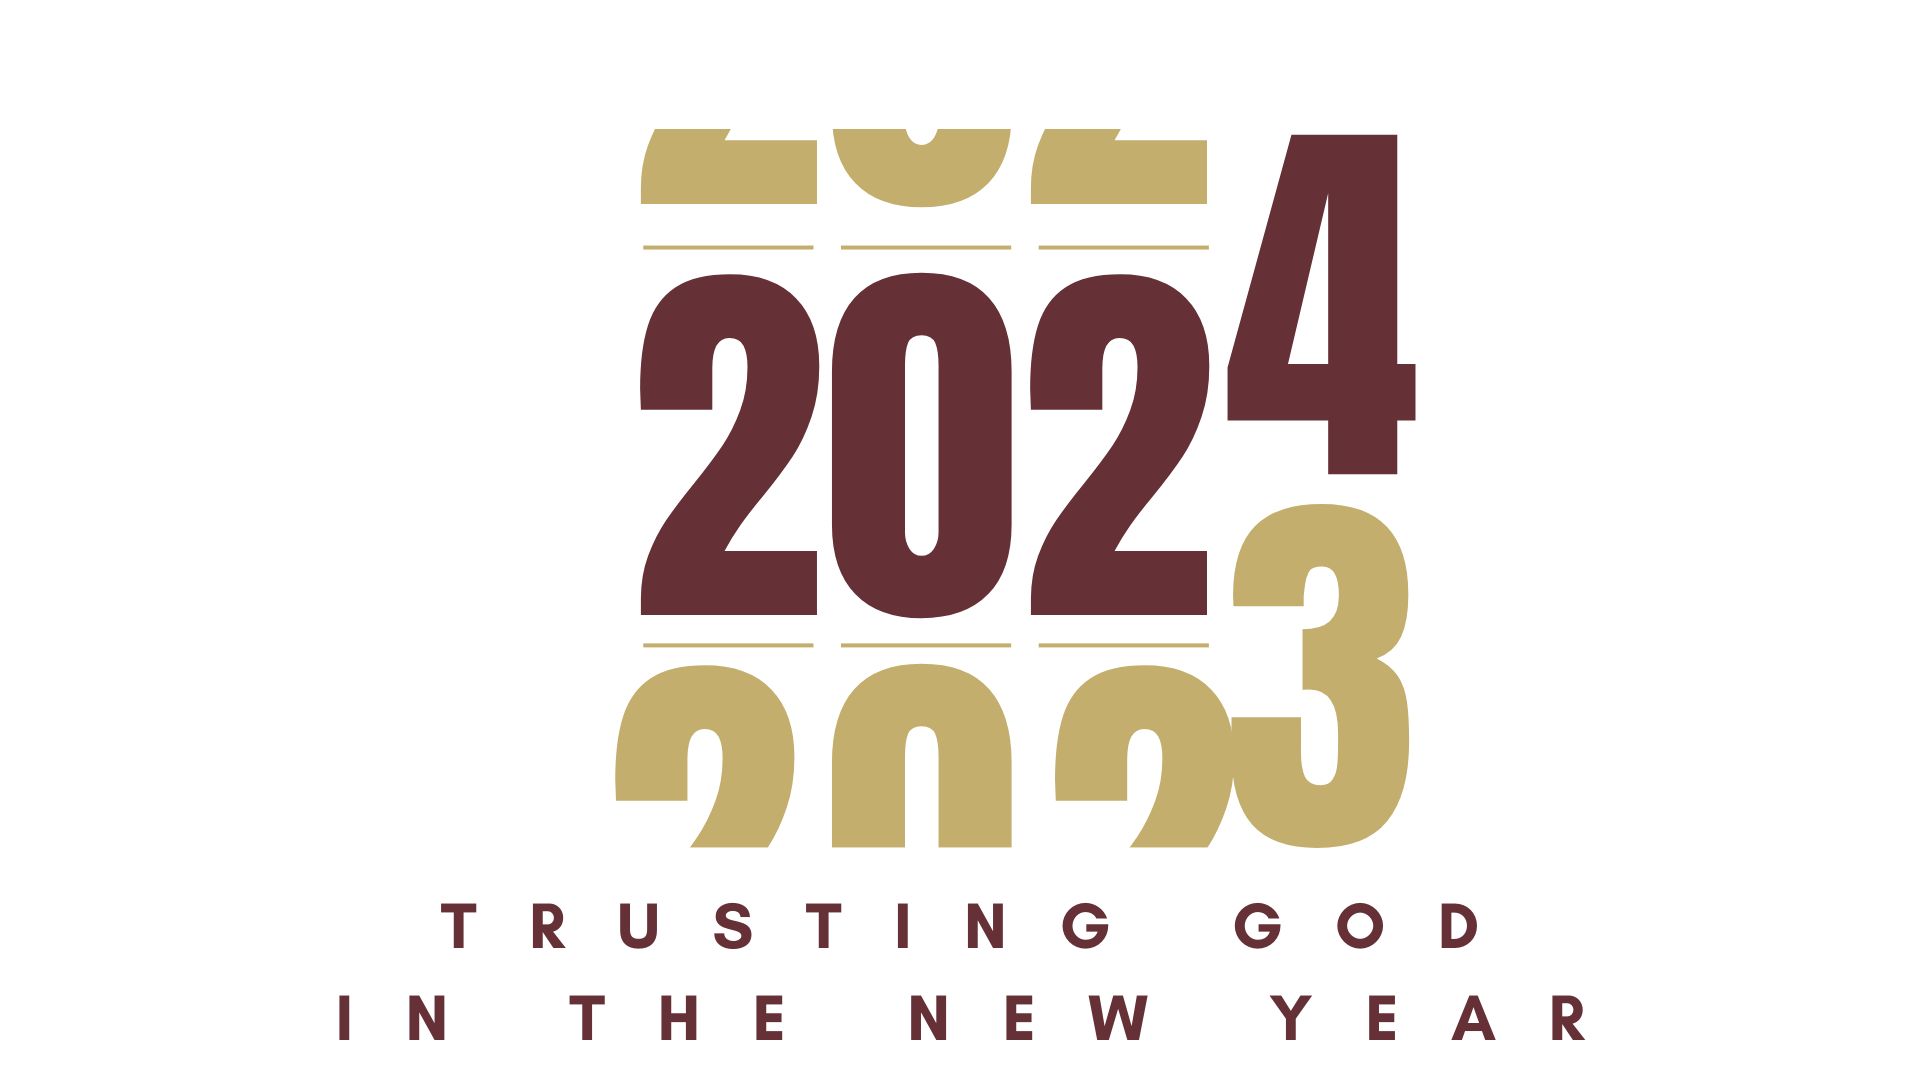 Trusting God in the New Year